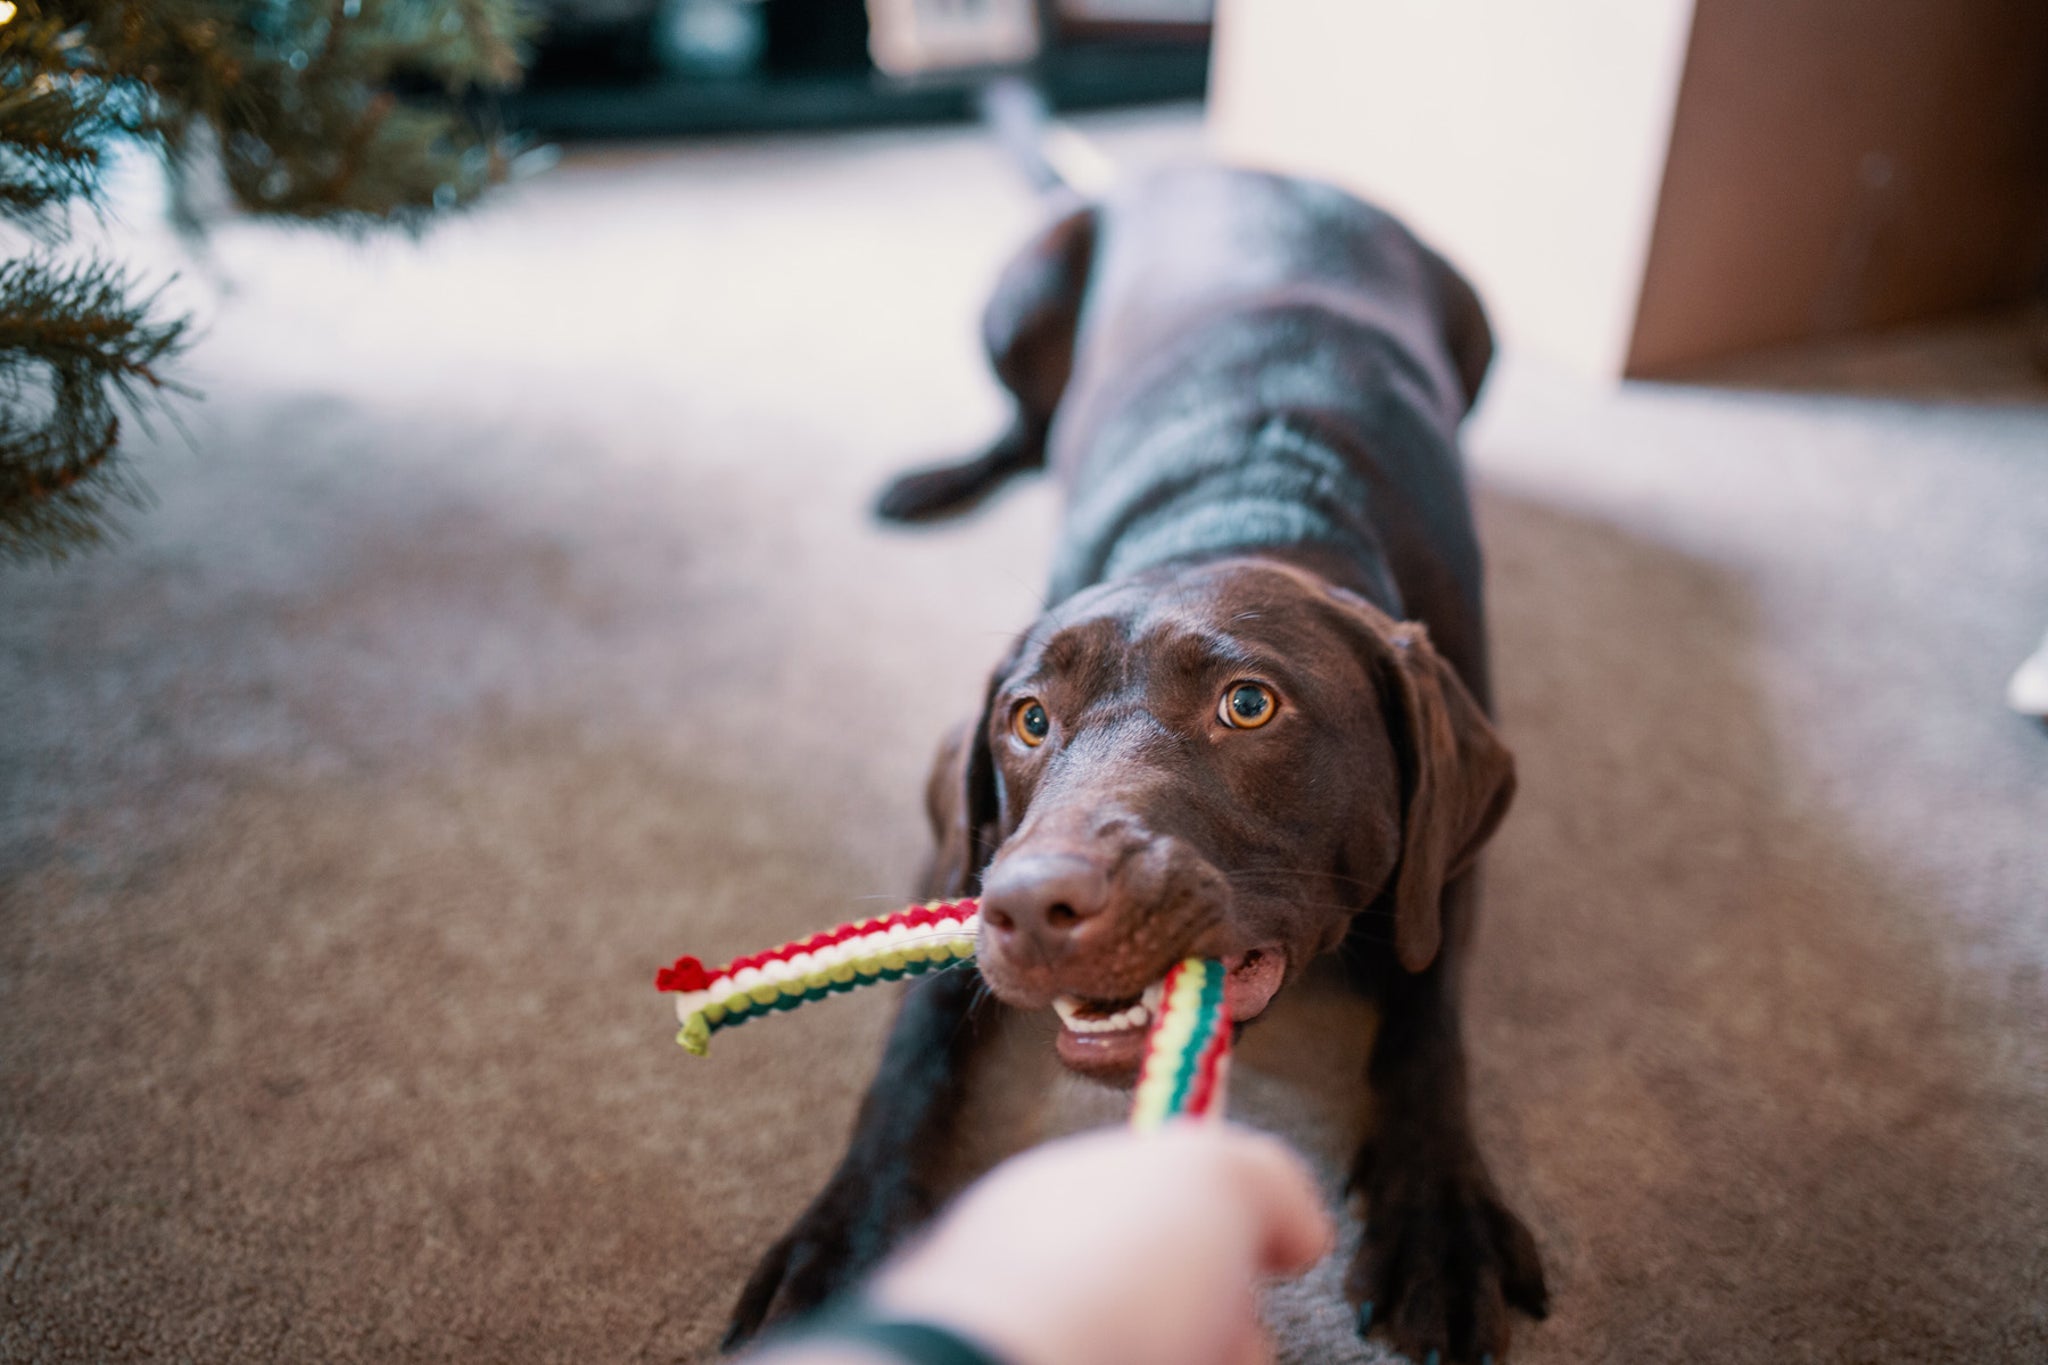 Benefits of Interactive Dog Toys & Puzzle Toys